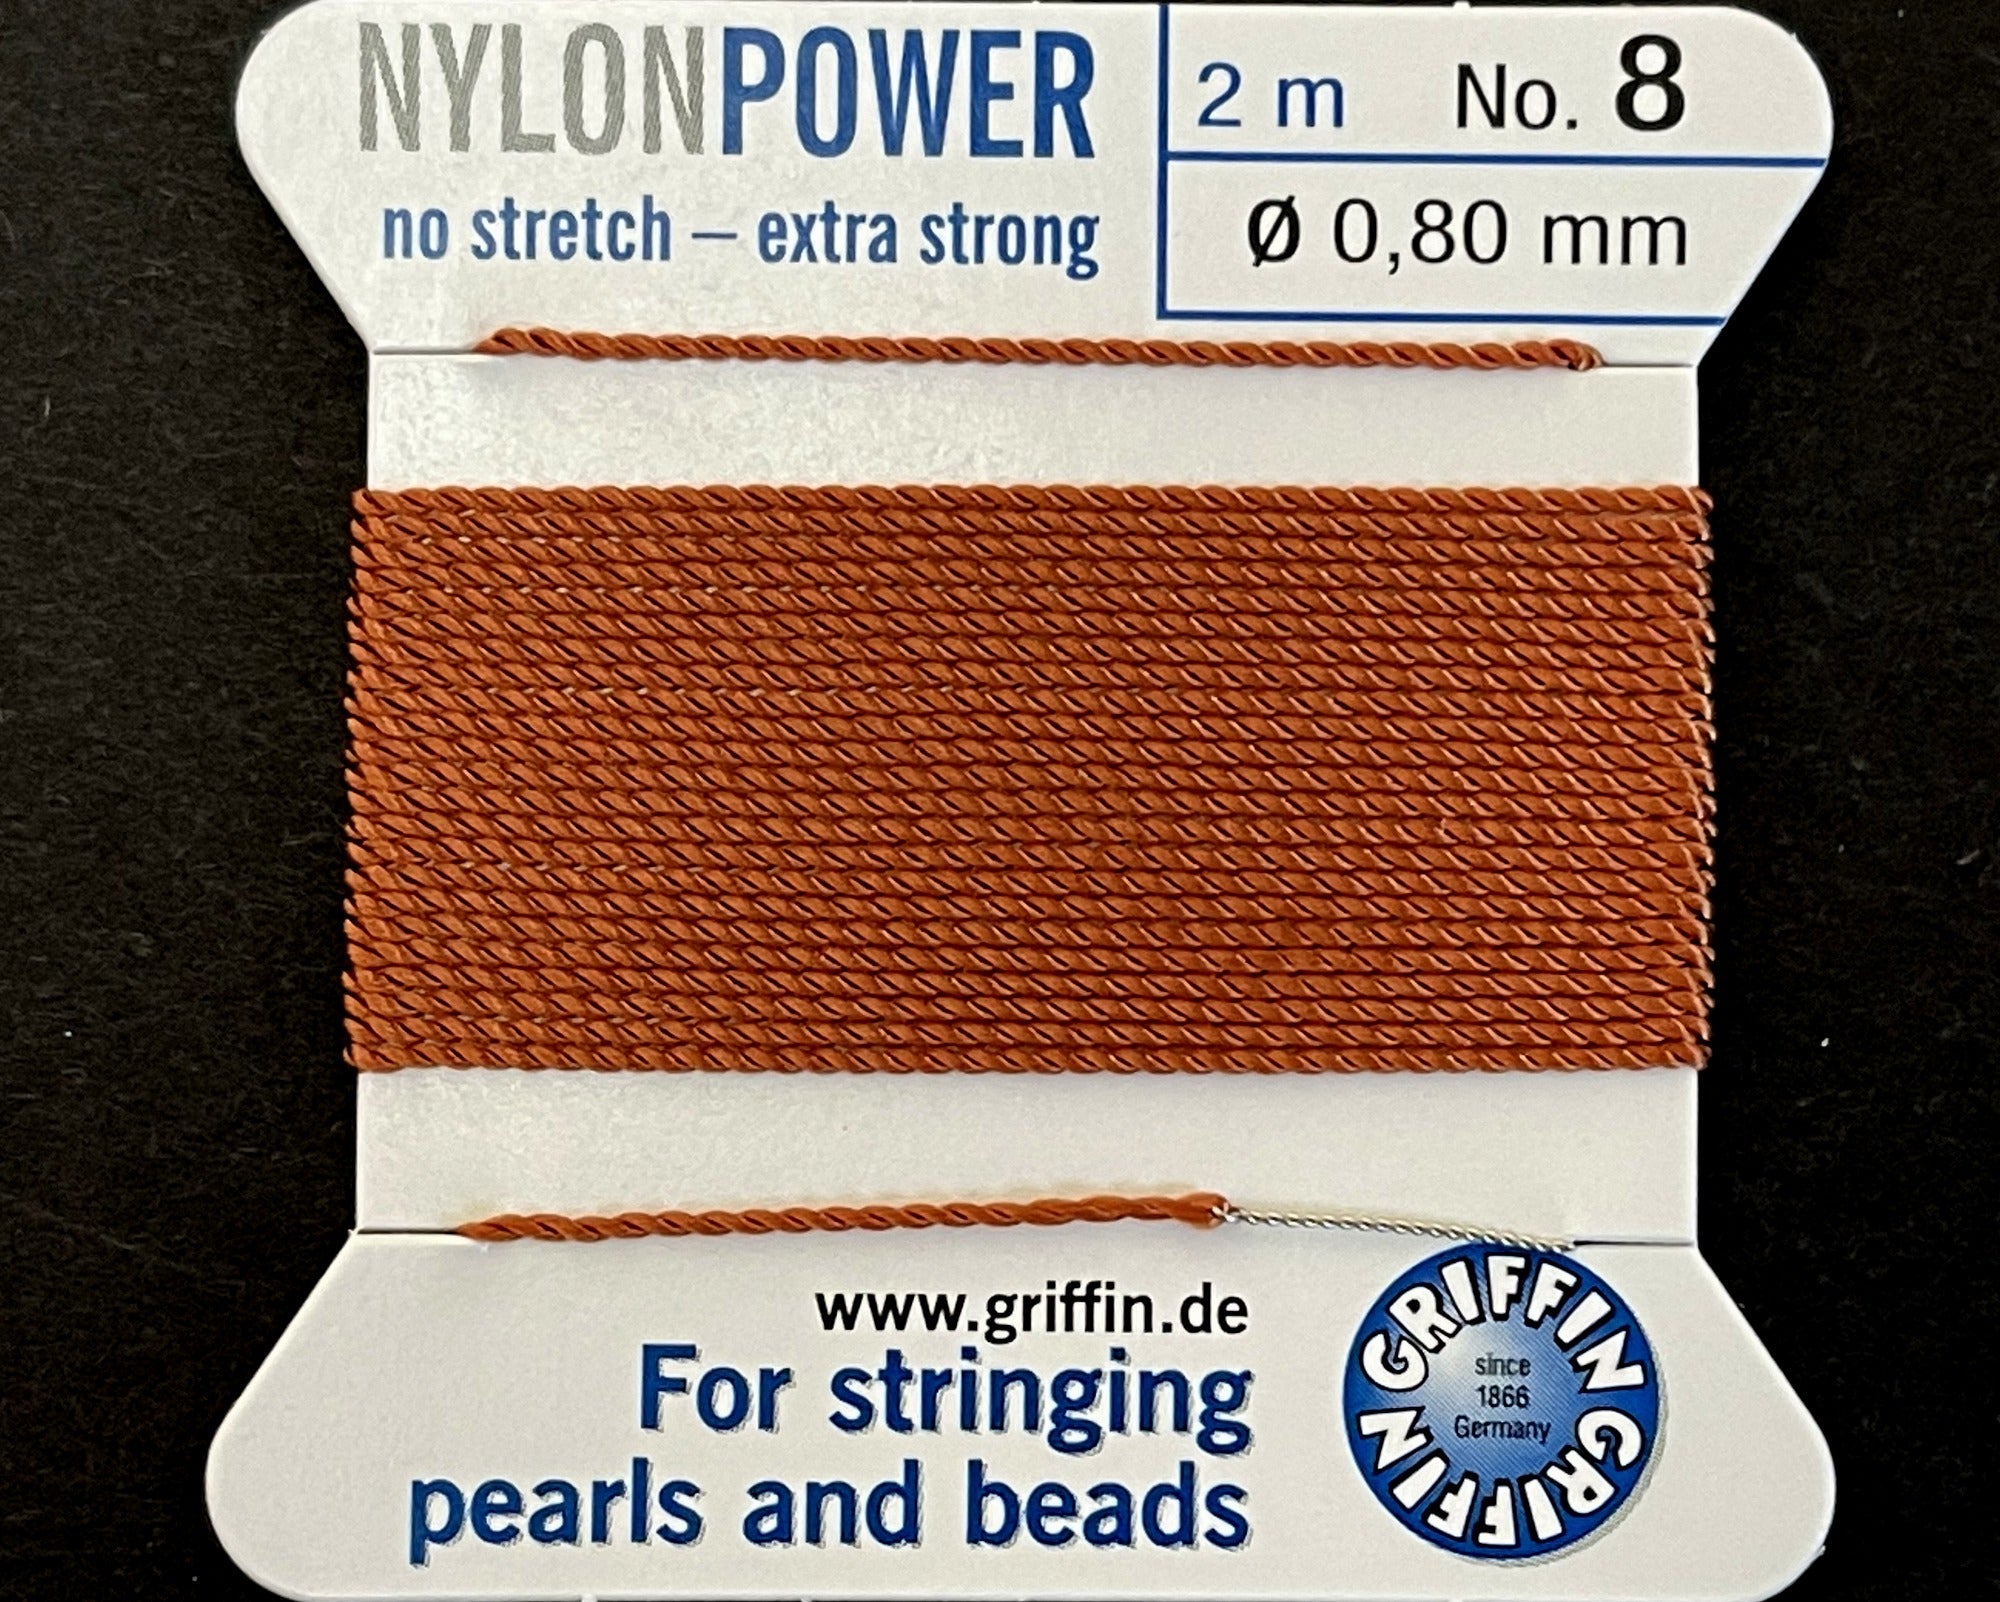 Griffin Nylon Power beading cord with needle, size #8 - 0.80mm, 16 color choice, 2 meter - Oz Beads 